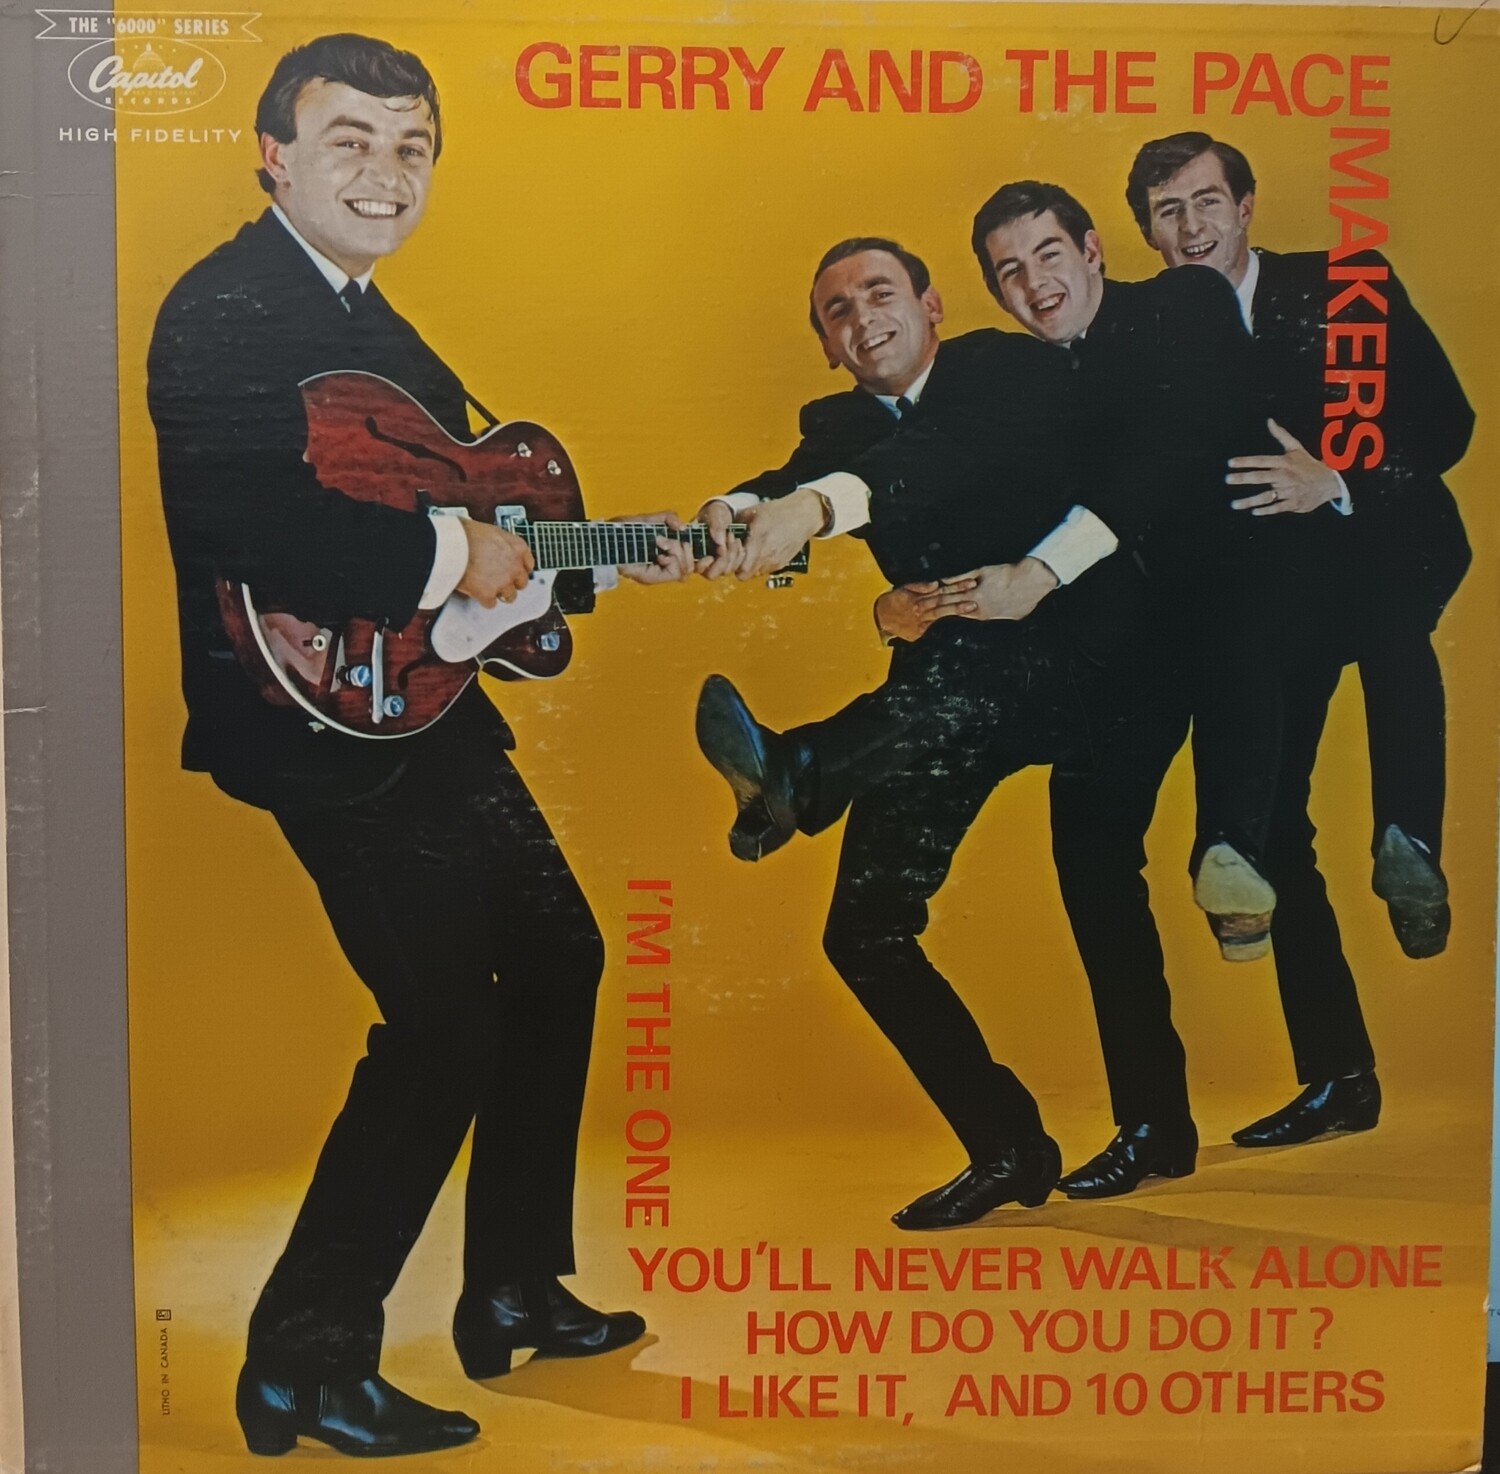 GERRY AND THE PEACEMAKERS - I'm the one